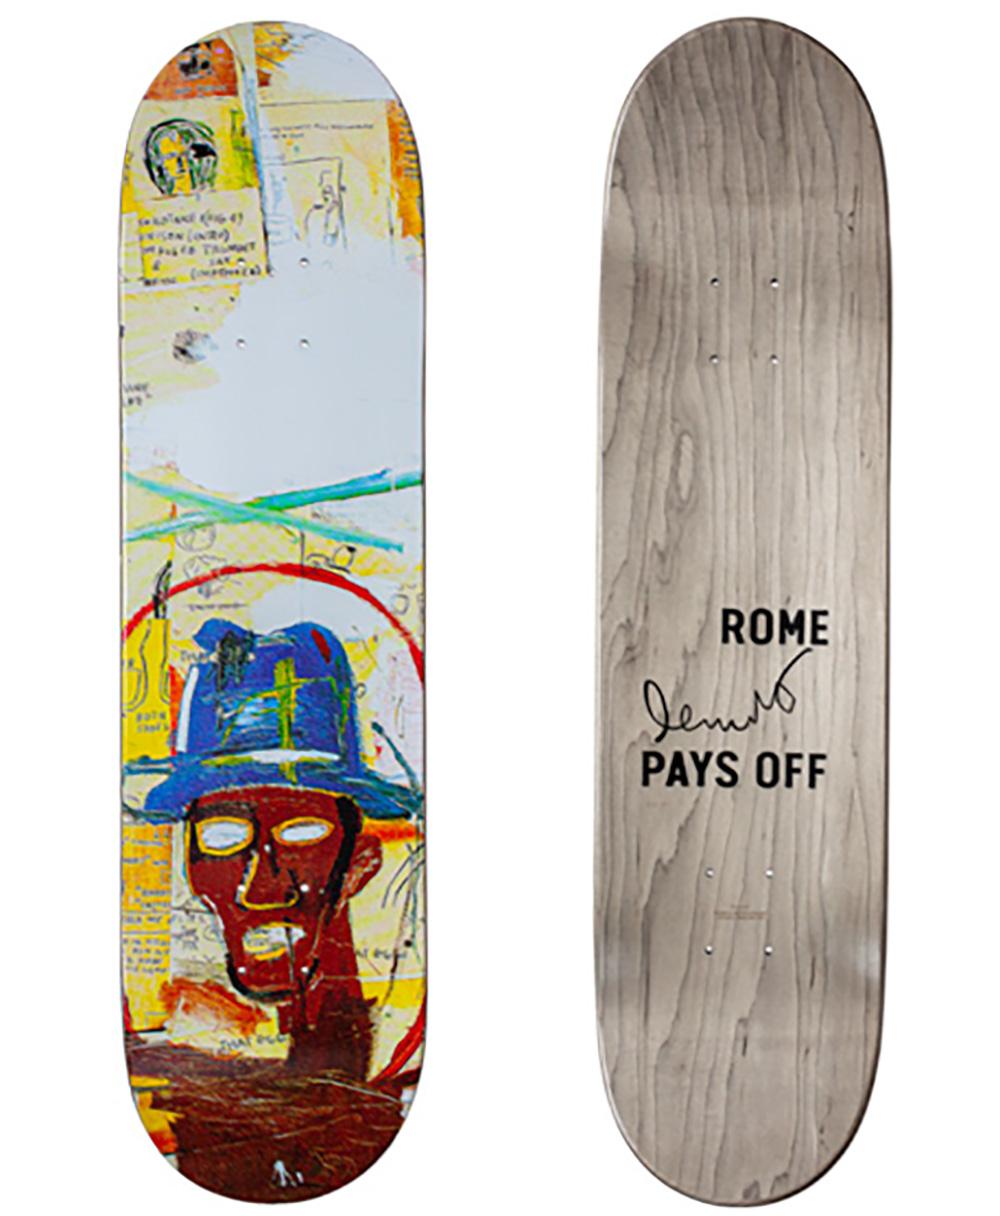 Rome Pays Off x Basquiat and Disney x Haring Skate Decks For Sale 1